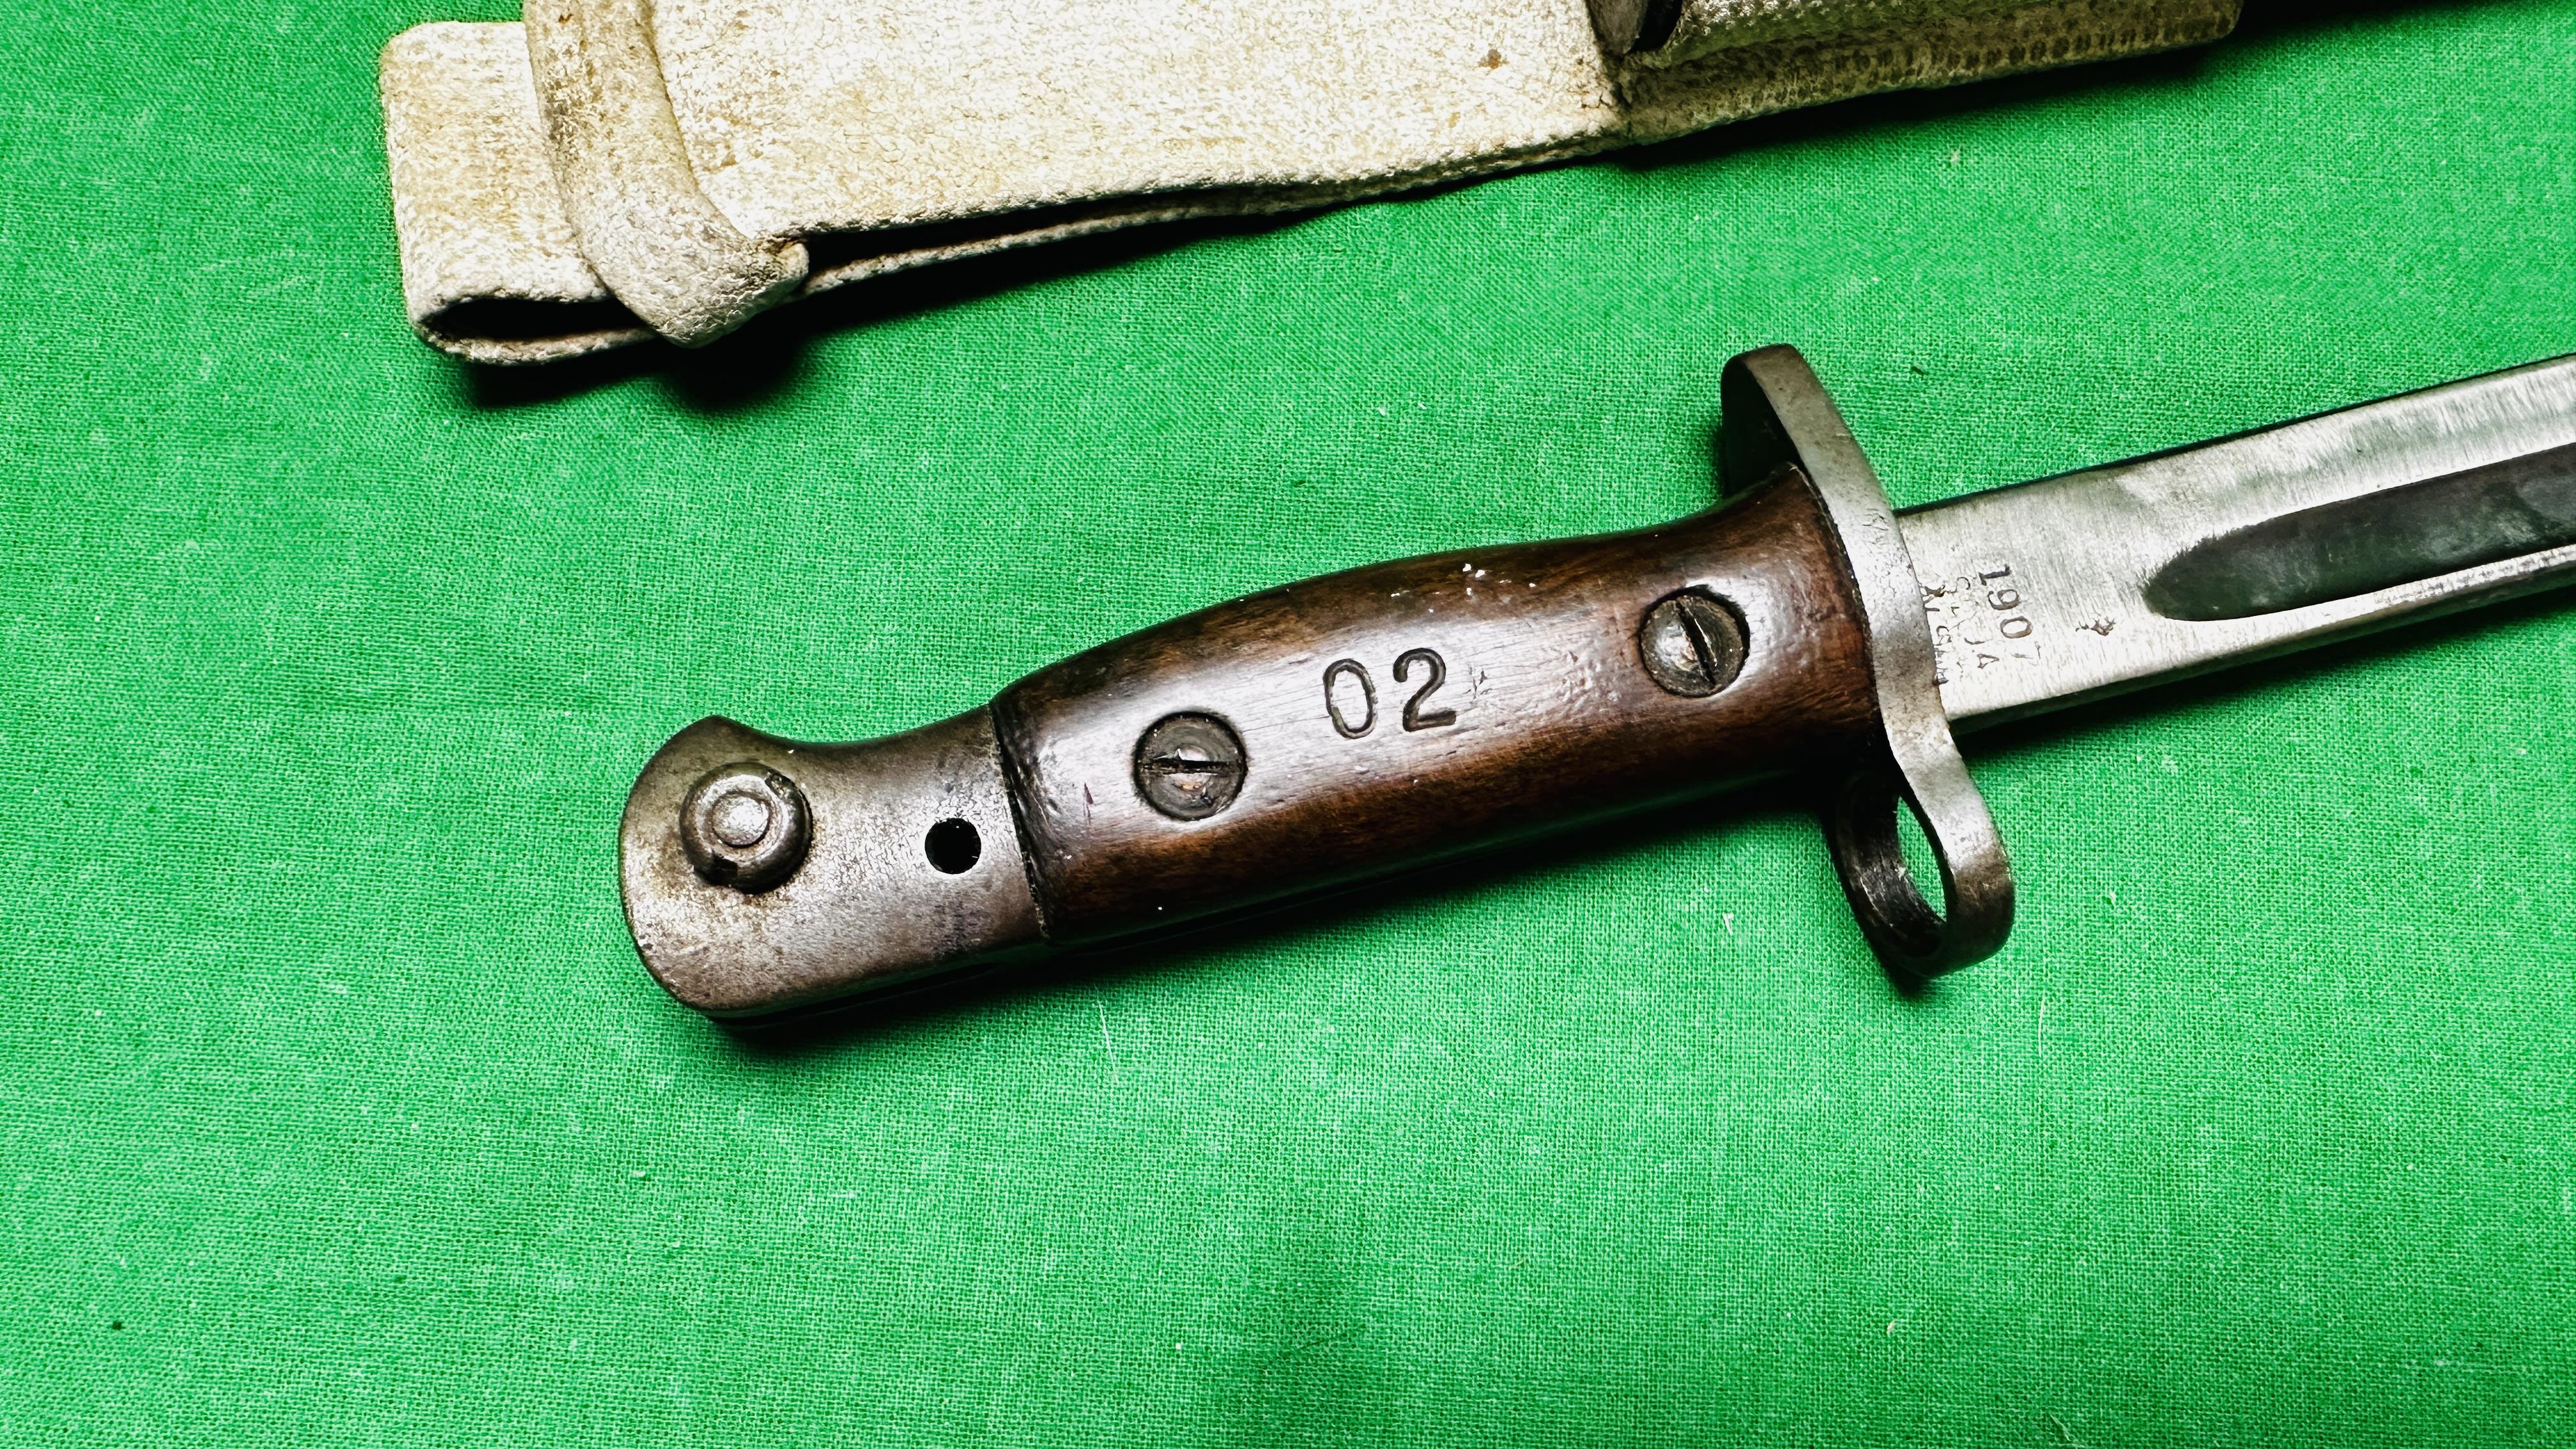 BRITISH 1907 BAYONET WITH SCABBARD ALONG WITH SNAIL BRAND CRATE HAMMER - NO POSTAGE OR PACKING - Image 6 of 15